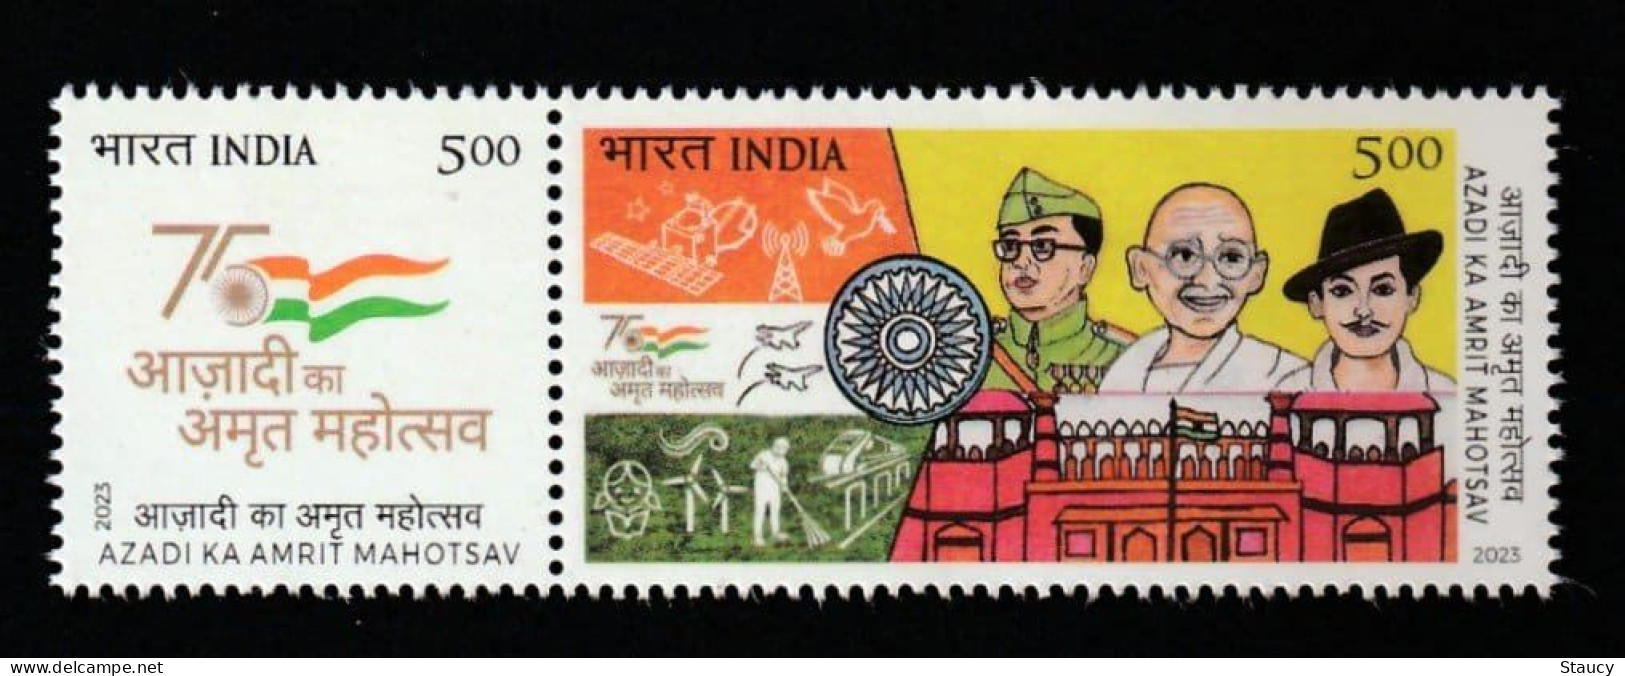 India 2023 Complete Year Collection of 74v Commemorative Stamps / year Pack MNH as per scan